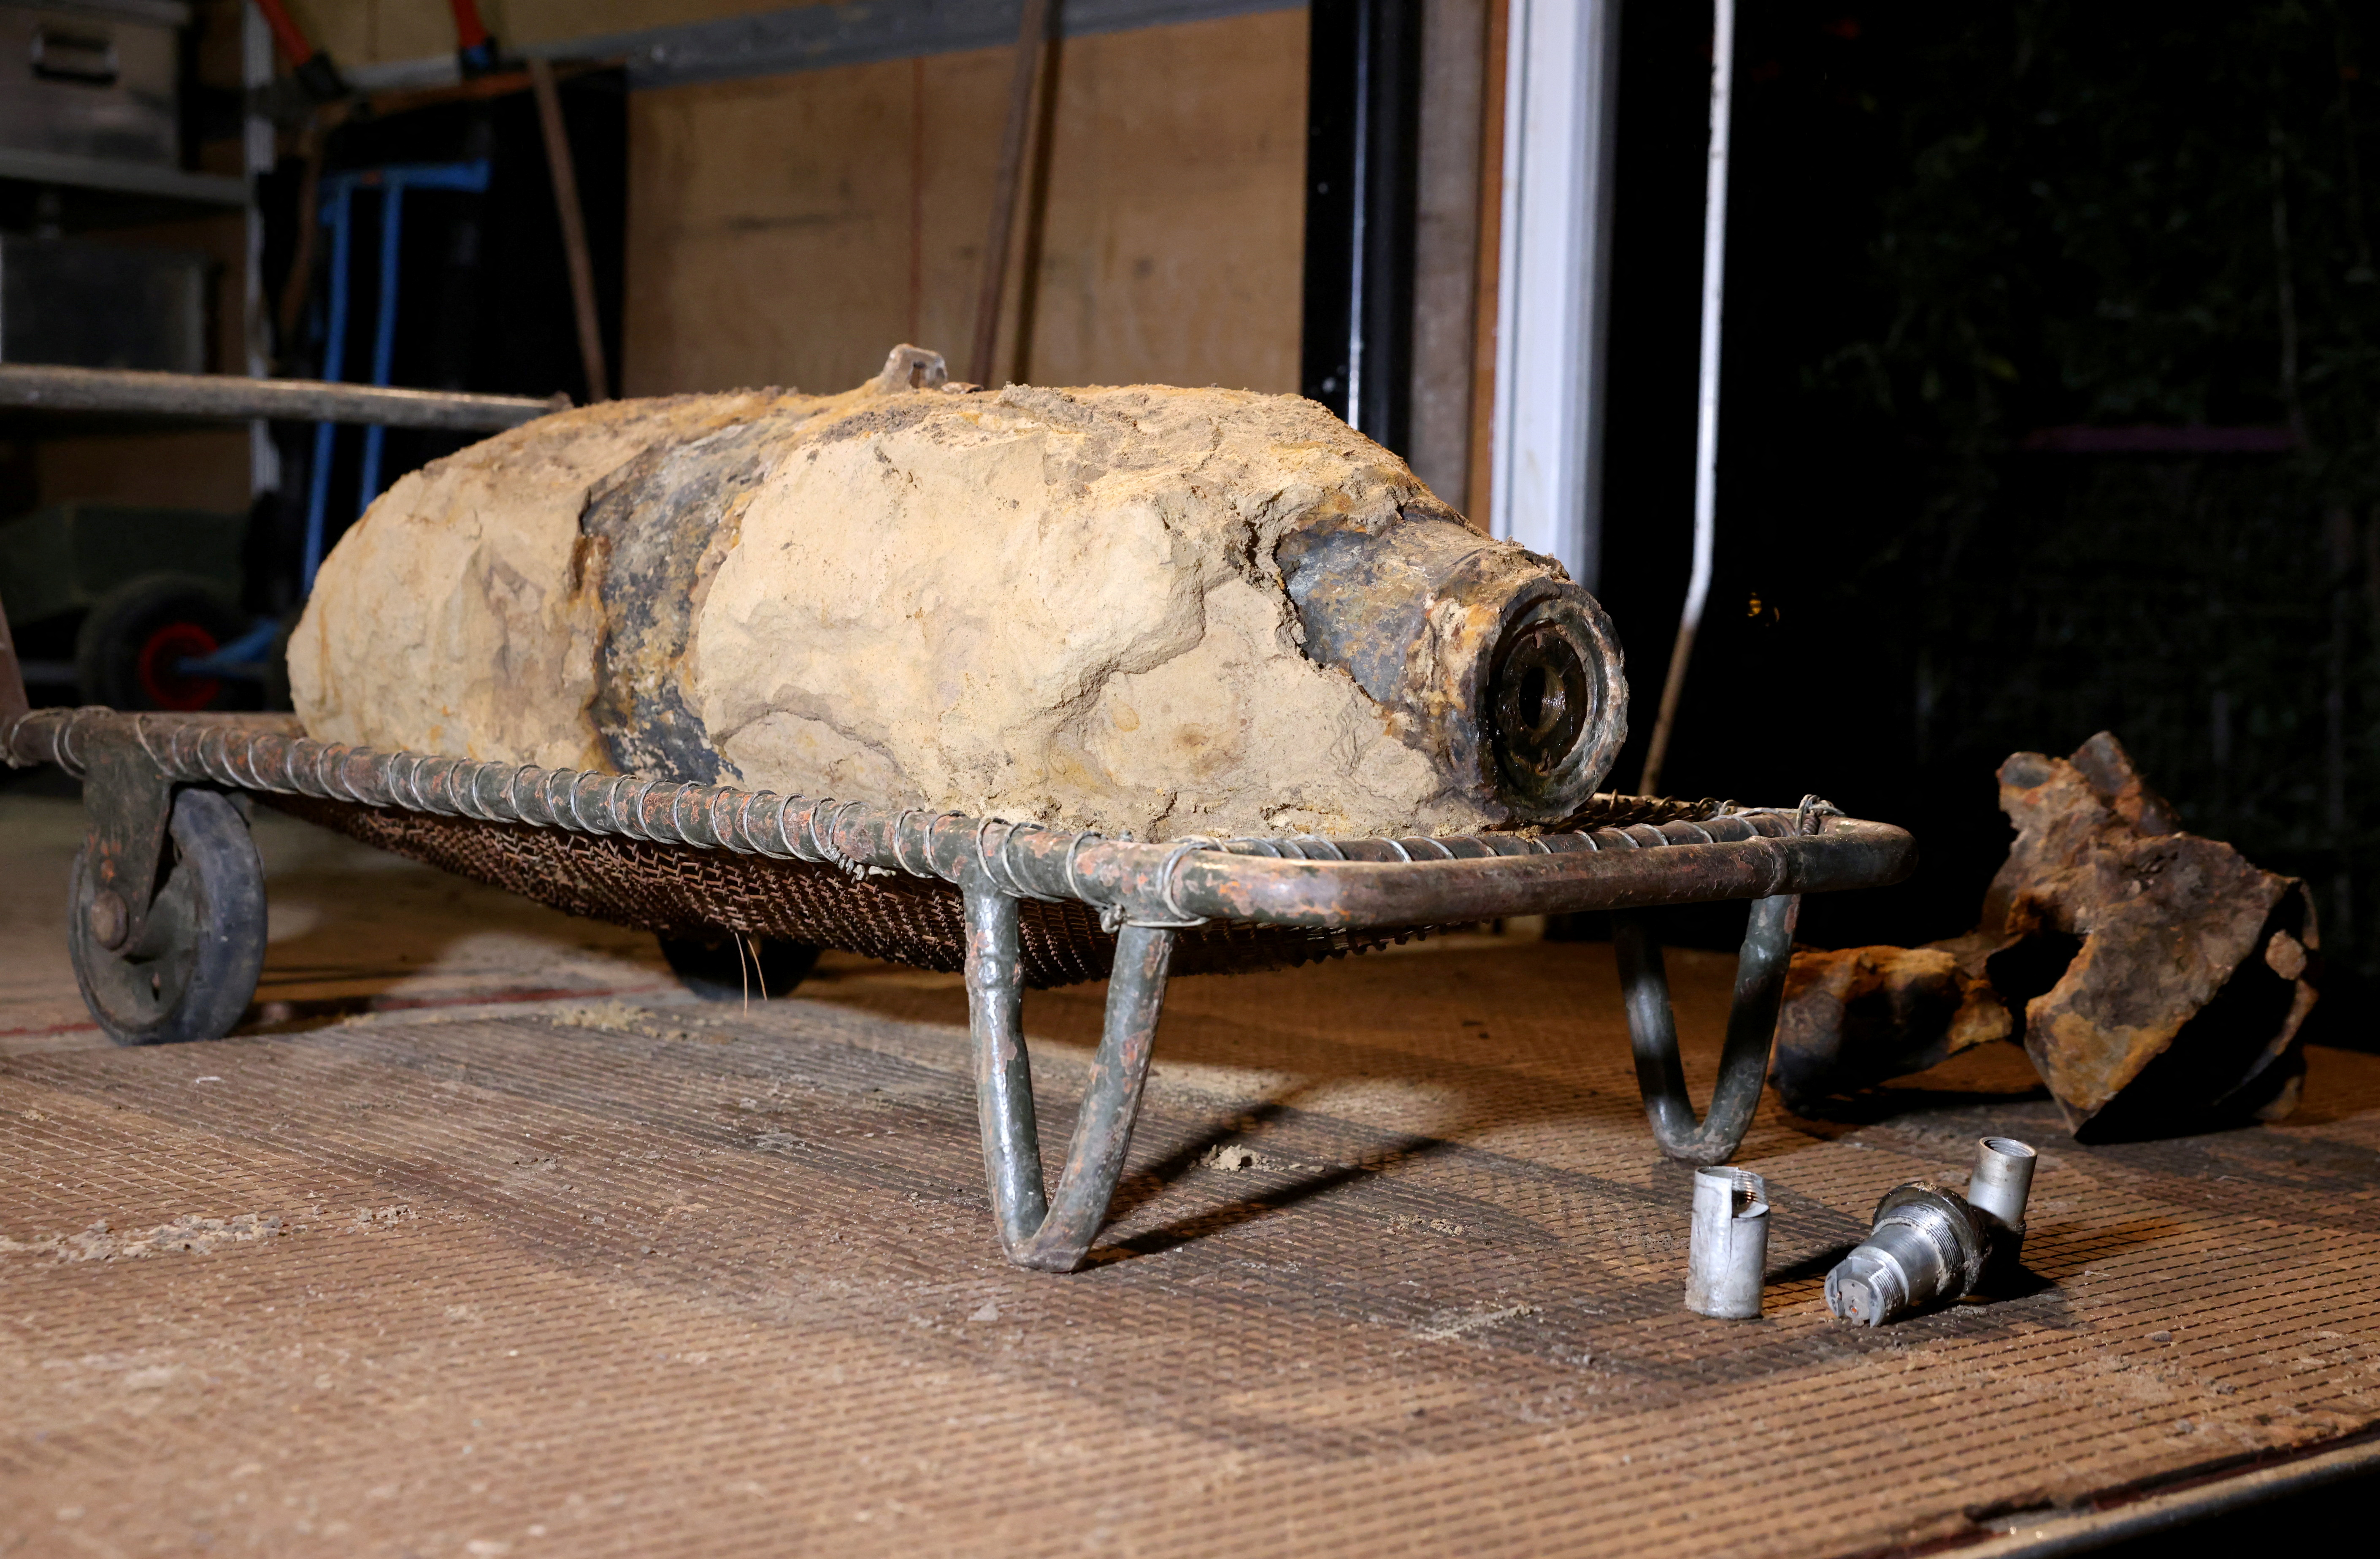 A World War II bomb remains in a truck after being defused